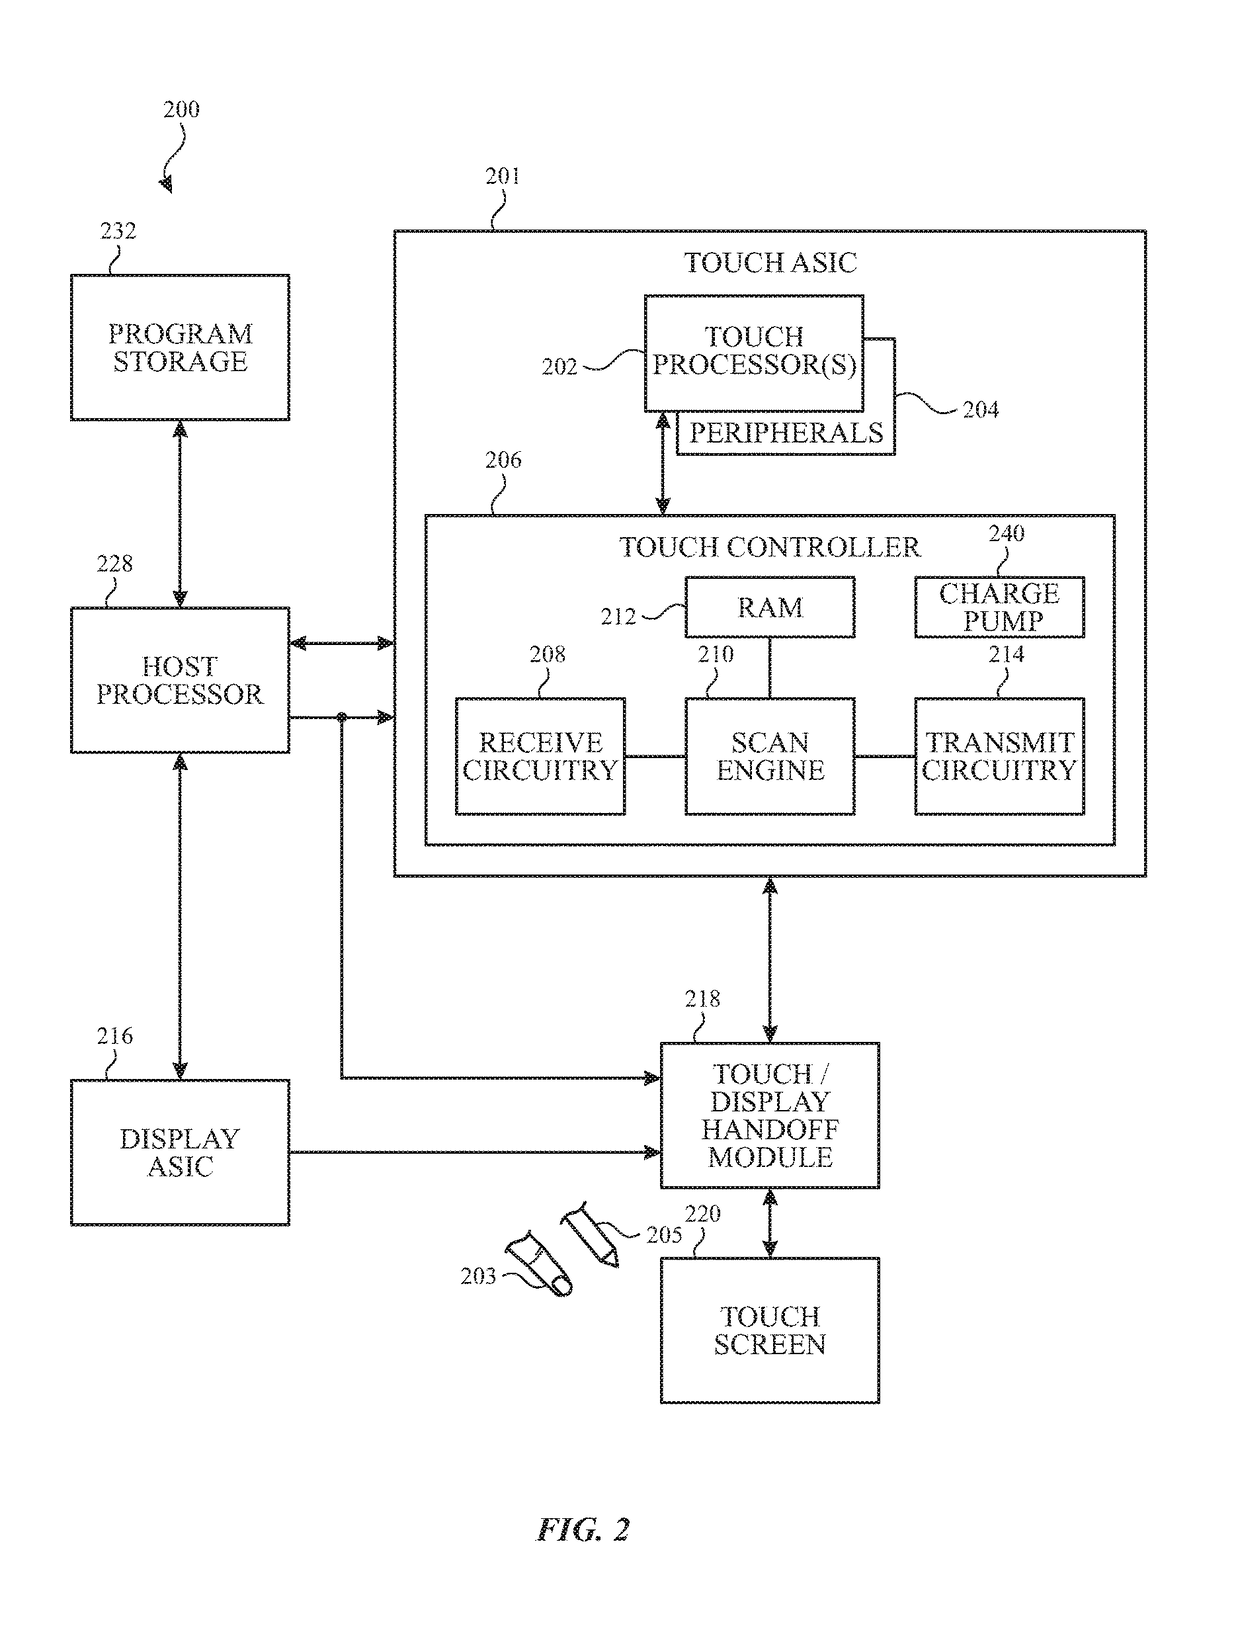 Touch induced flicker mitigation for variable refresh rate display